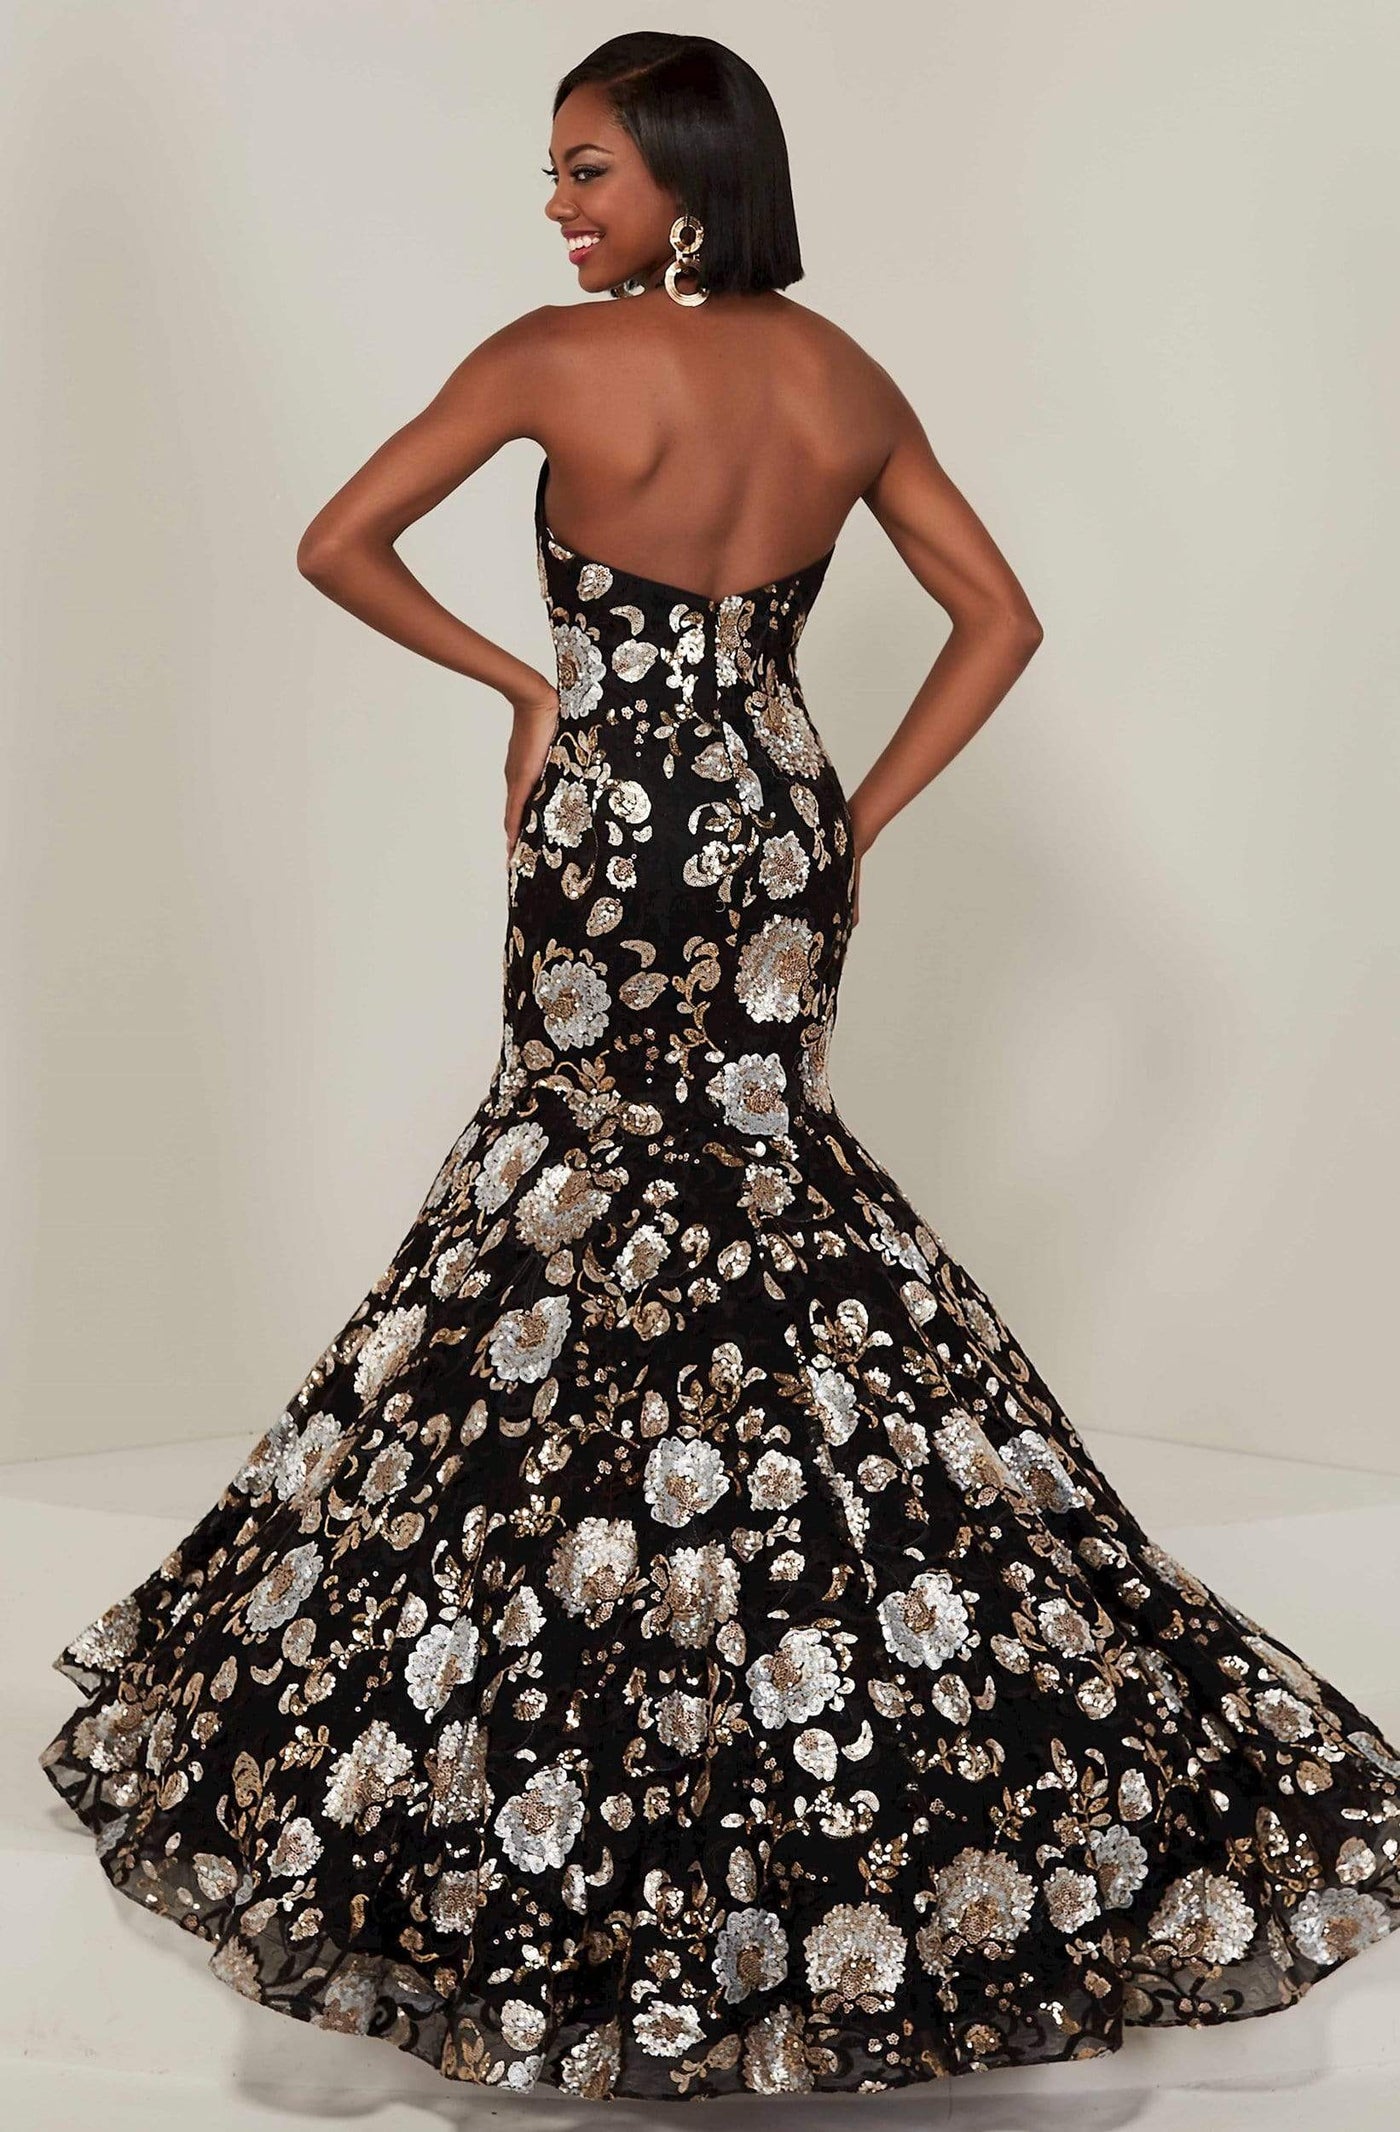 Tiffany Designs - 16366 Floral Sequined Illusion Halter Mermaid Gown Special Occasion Dress 0 / Black/Gold